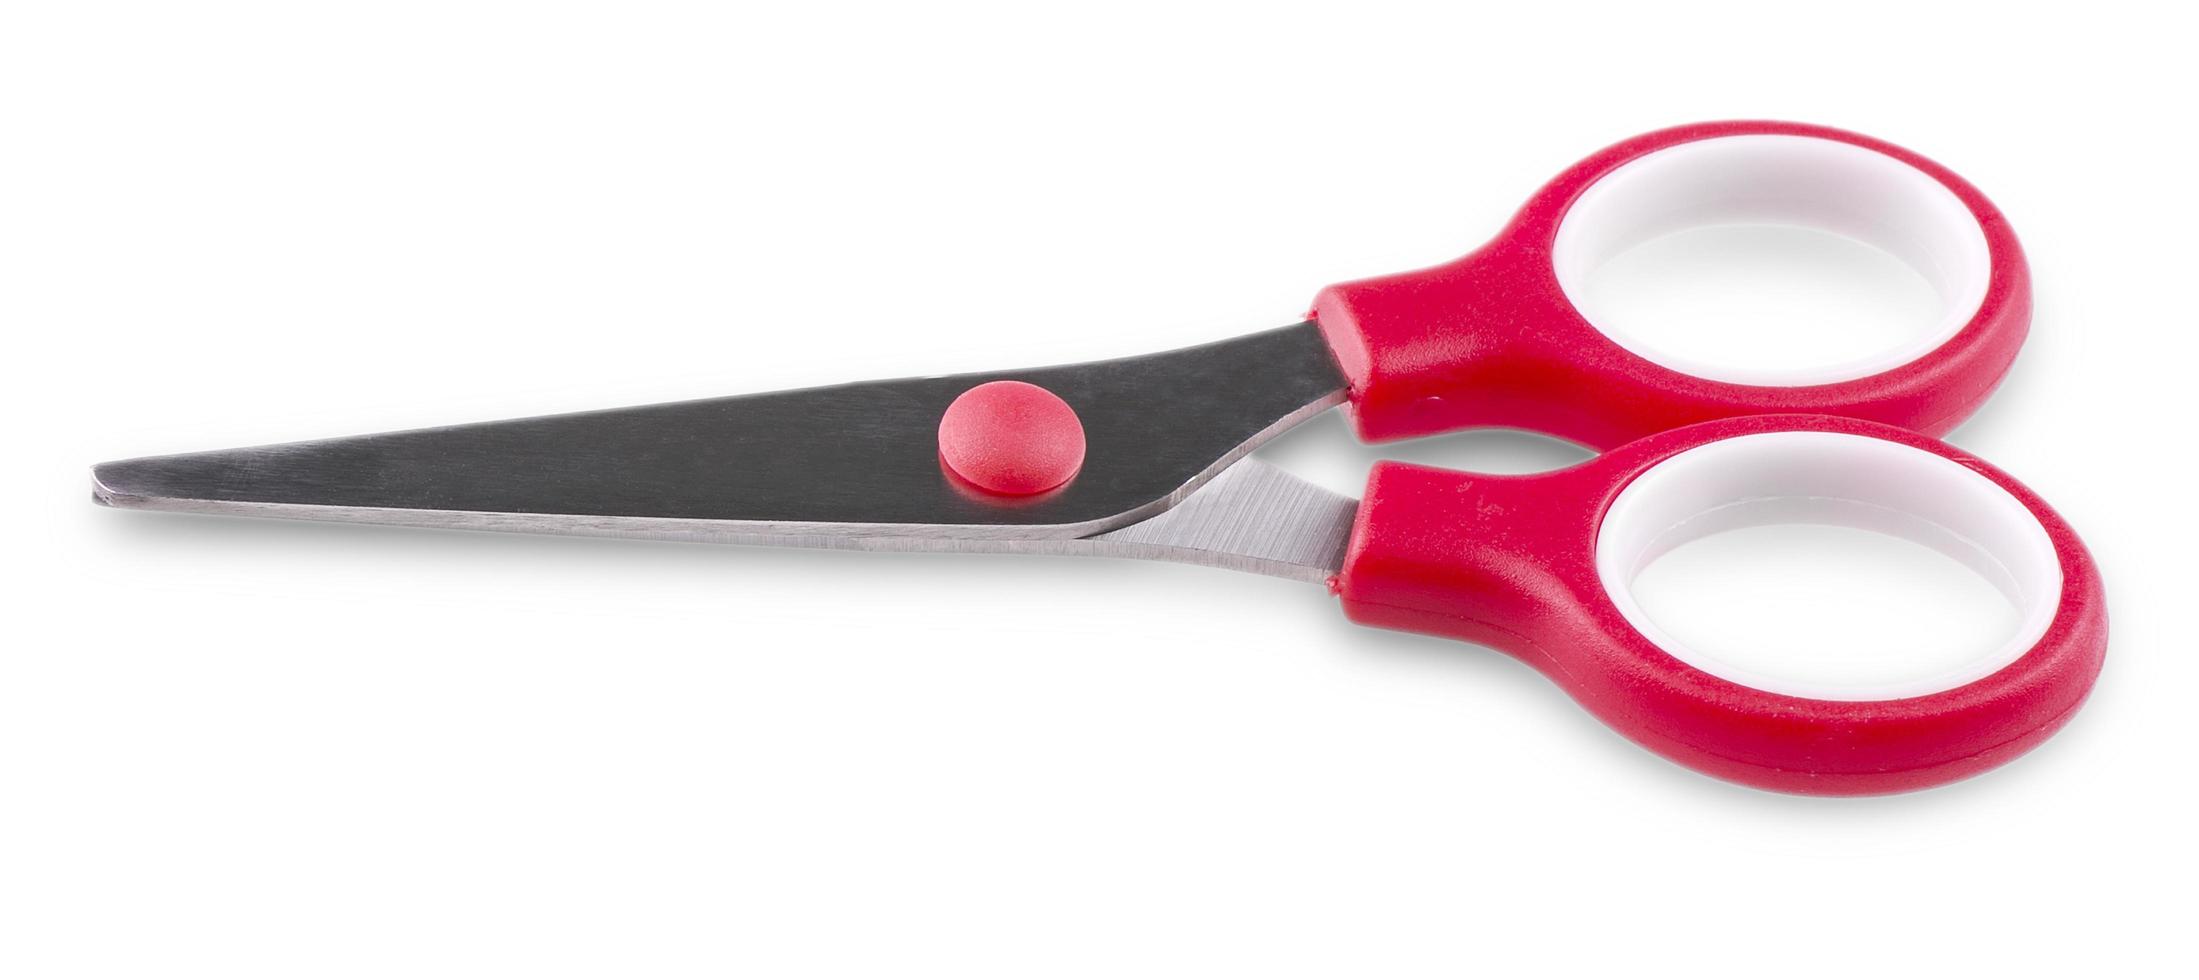 Red scissors isolated on a white background photo